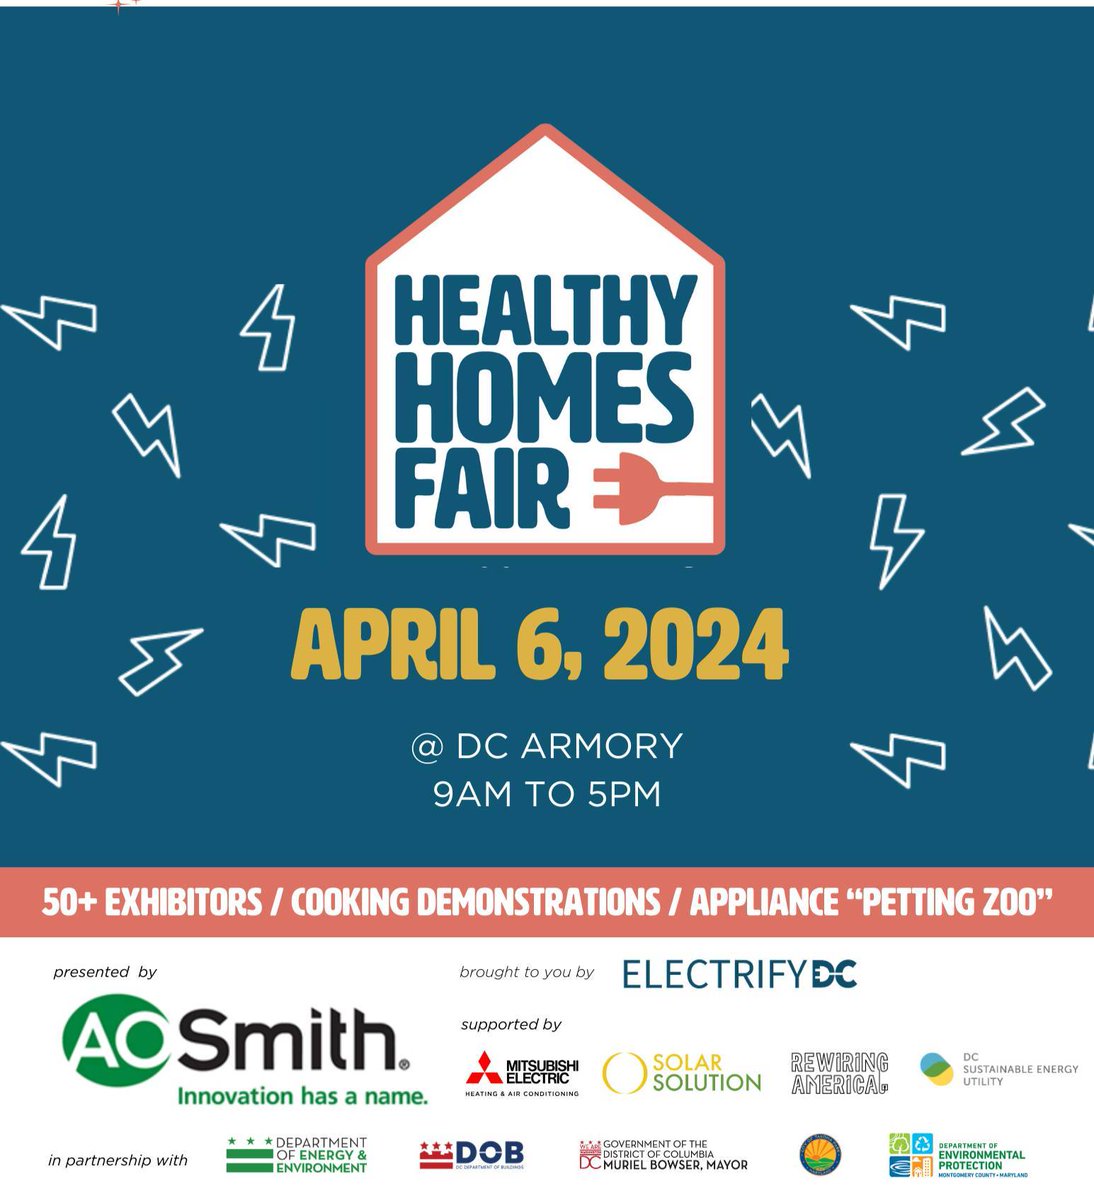 Help increase awareness about the products and services needed to combat climate change while making our homes healthier and more comfortable. Exhibit at the inaugural edition of the #HealthyHomesFair at the DC Armory Sat. 4/6 healthyhomesfair.org